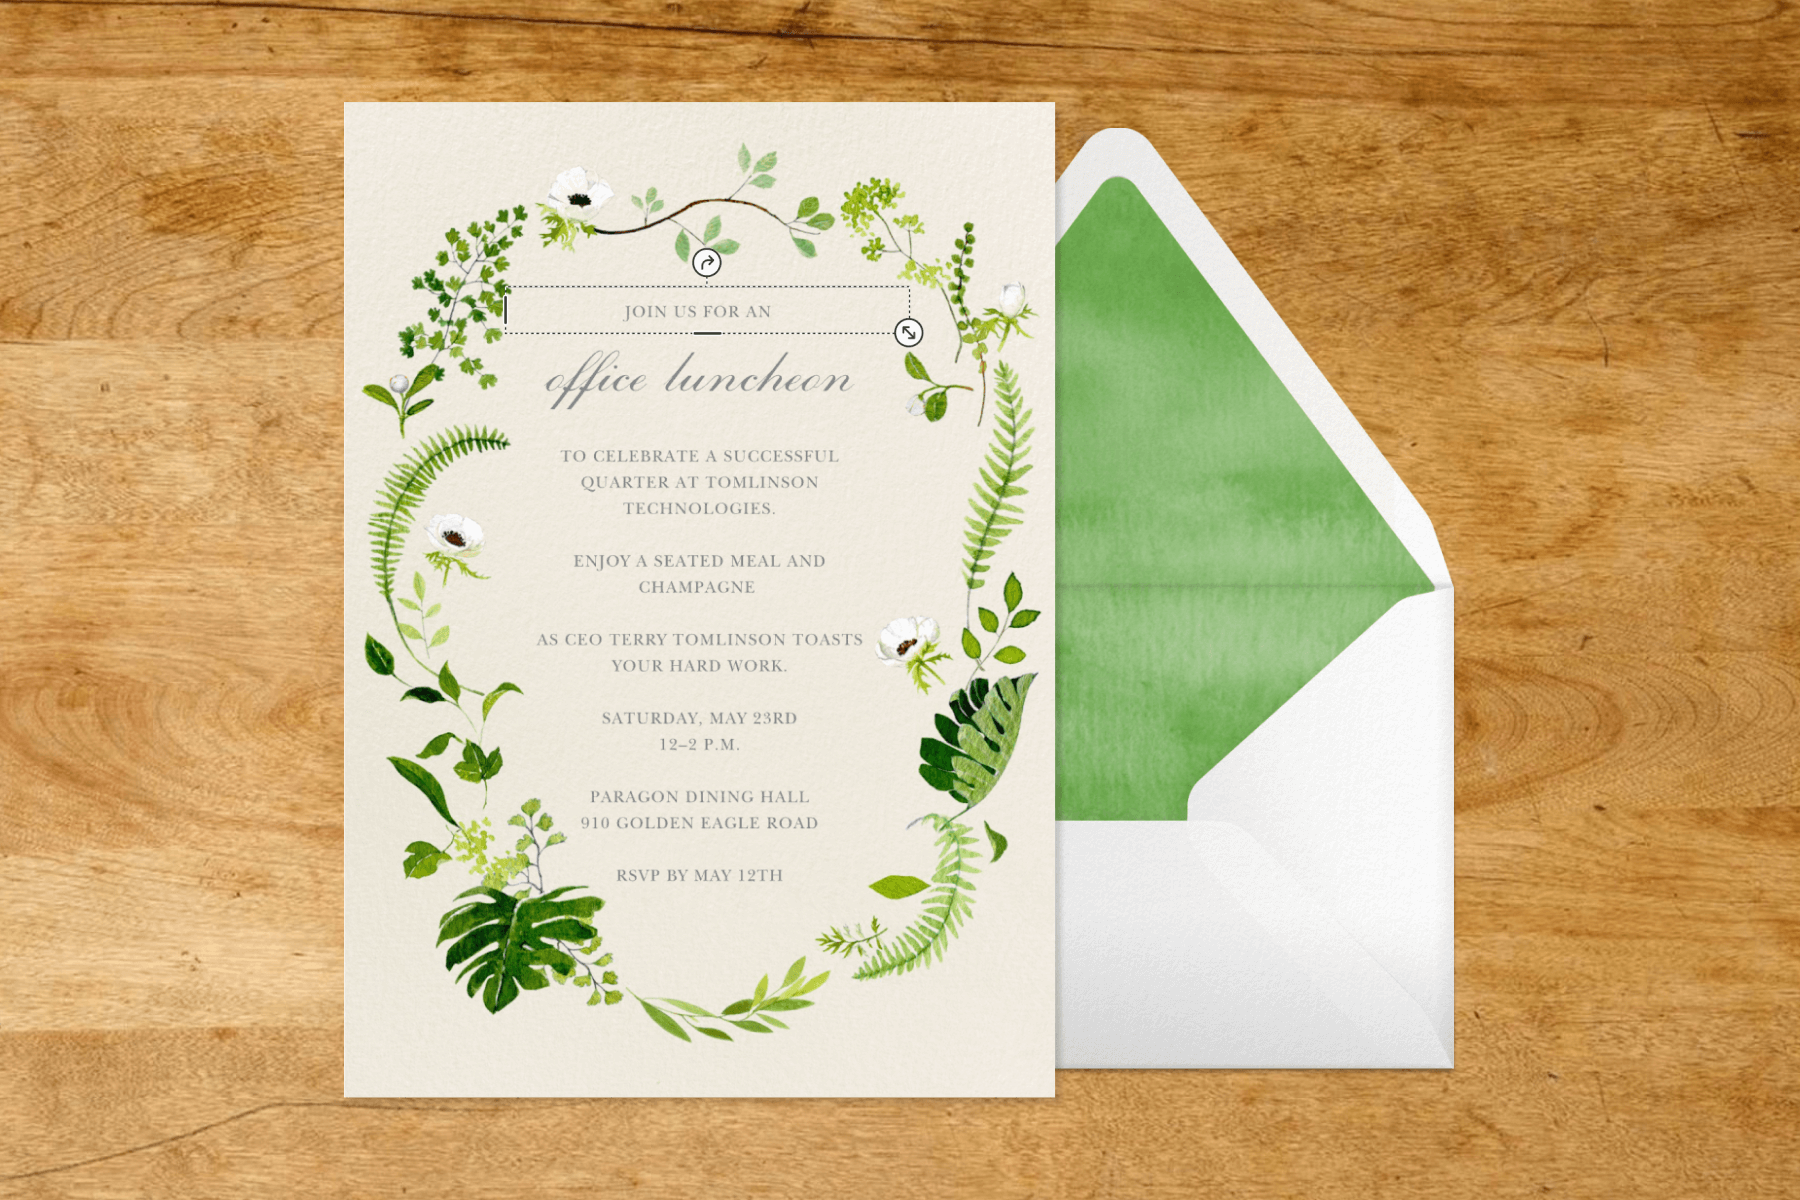 An invitation with a border of greenery and leaves beside a white and green envelope.